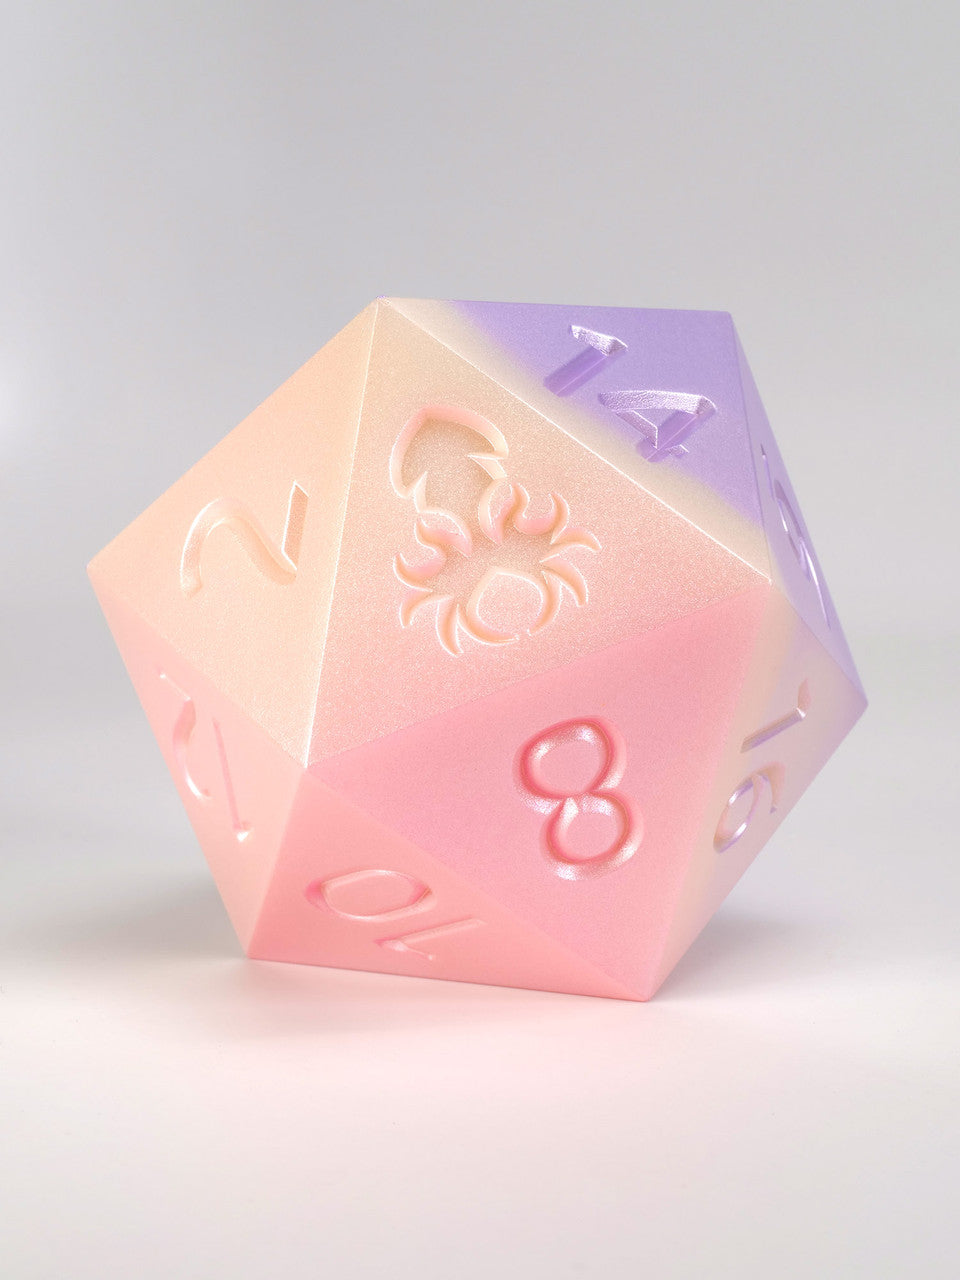 Ombre Elegant Pink to Periwinkle 55mm D20 Dice